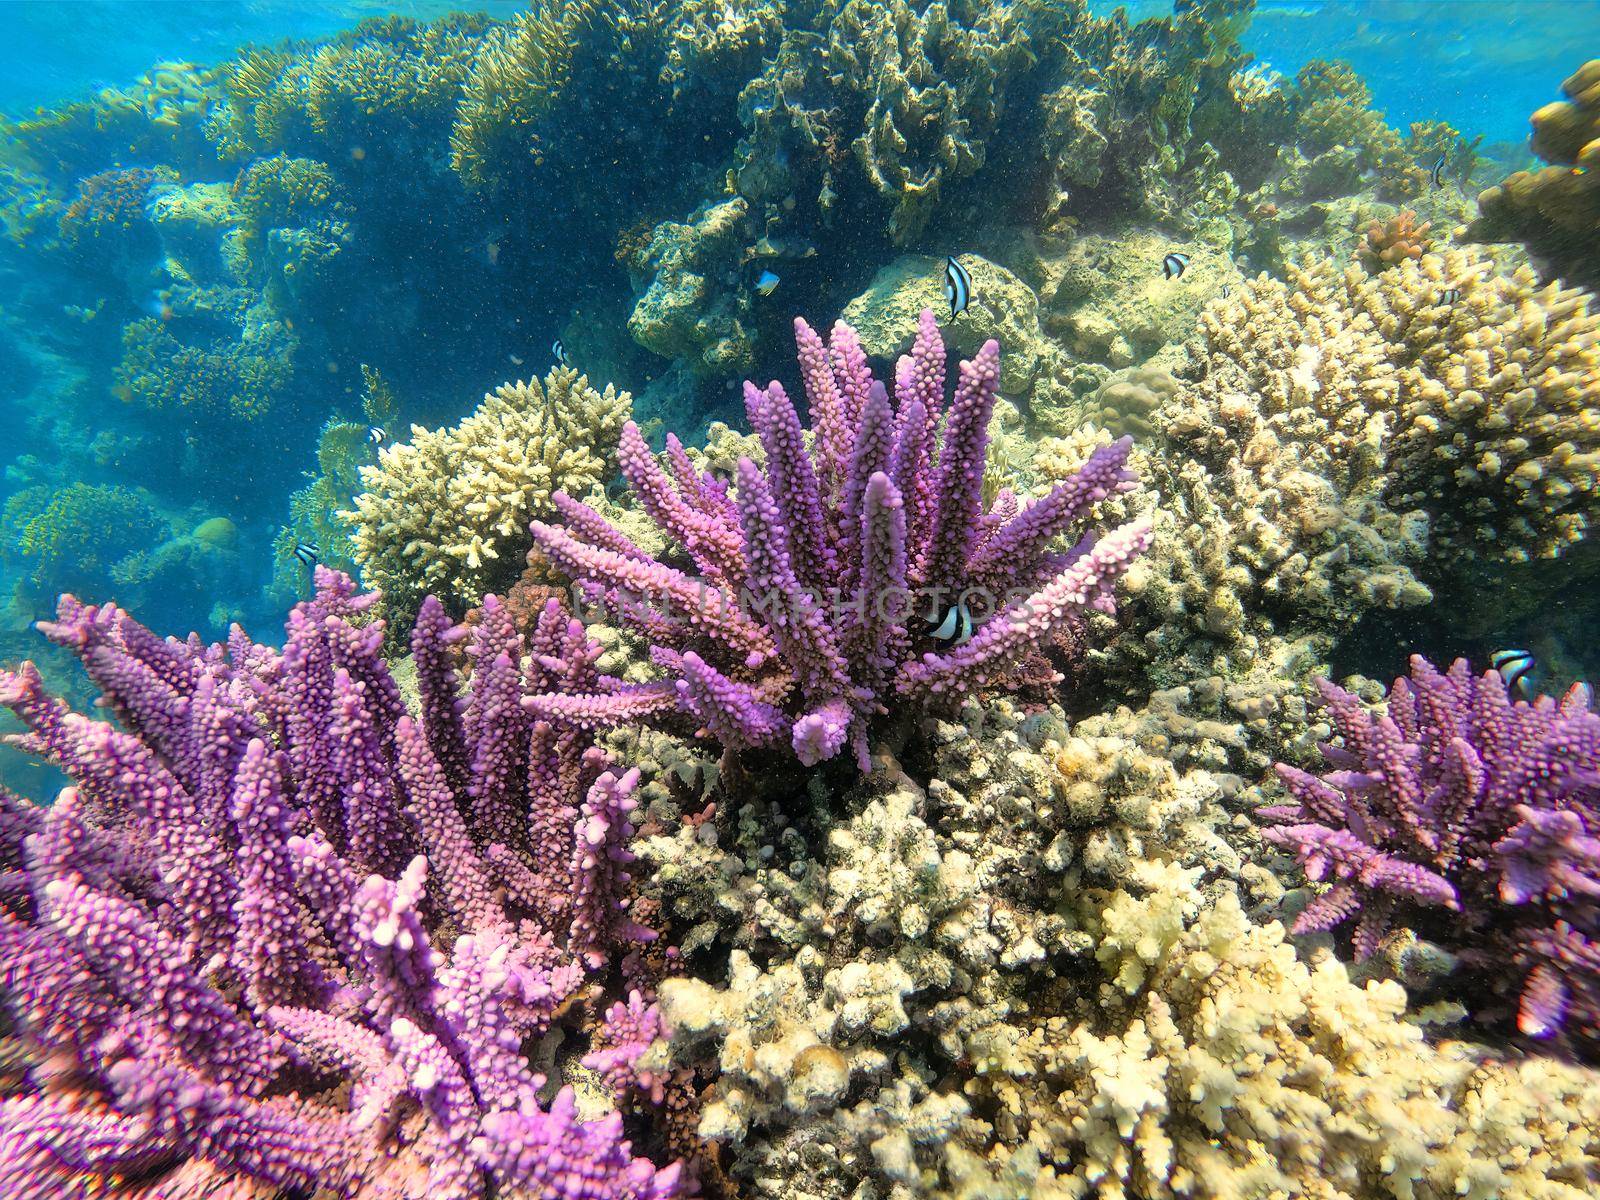 Coral on reef in red sea, Marsa Alam, Egypt by artush